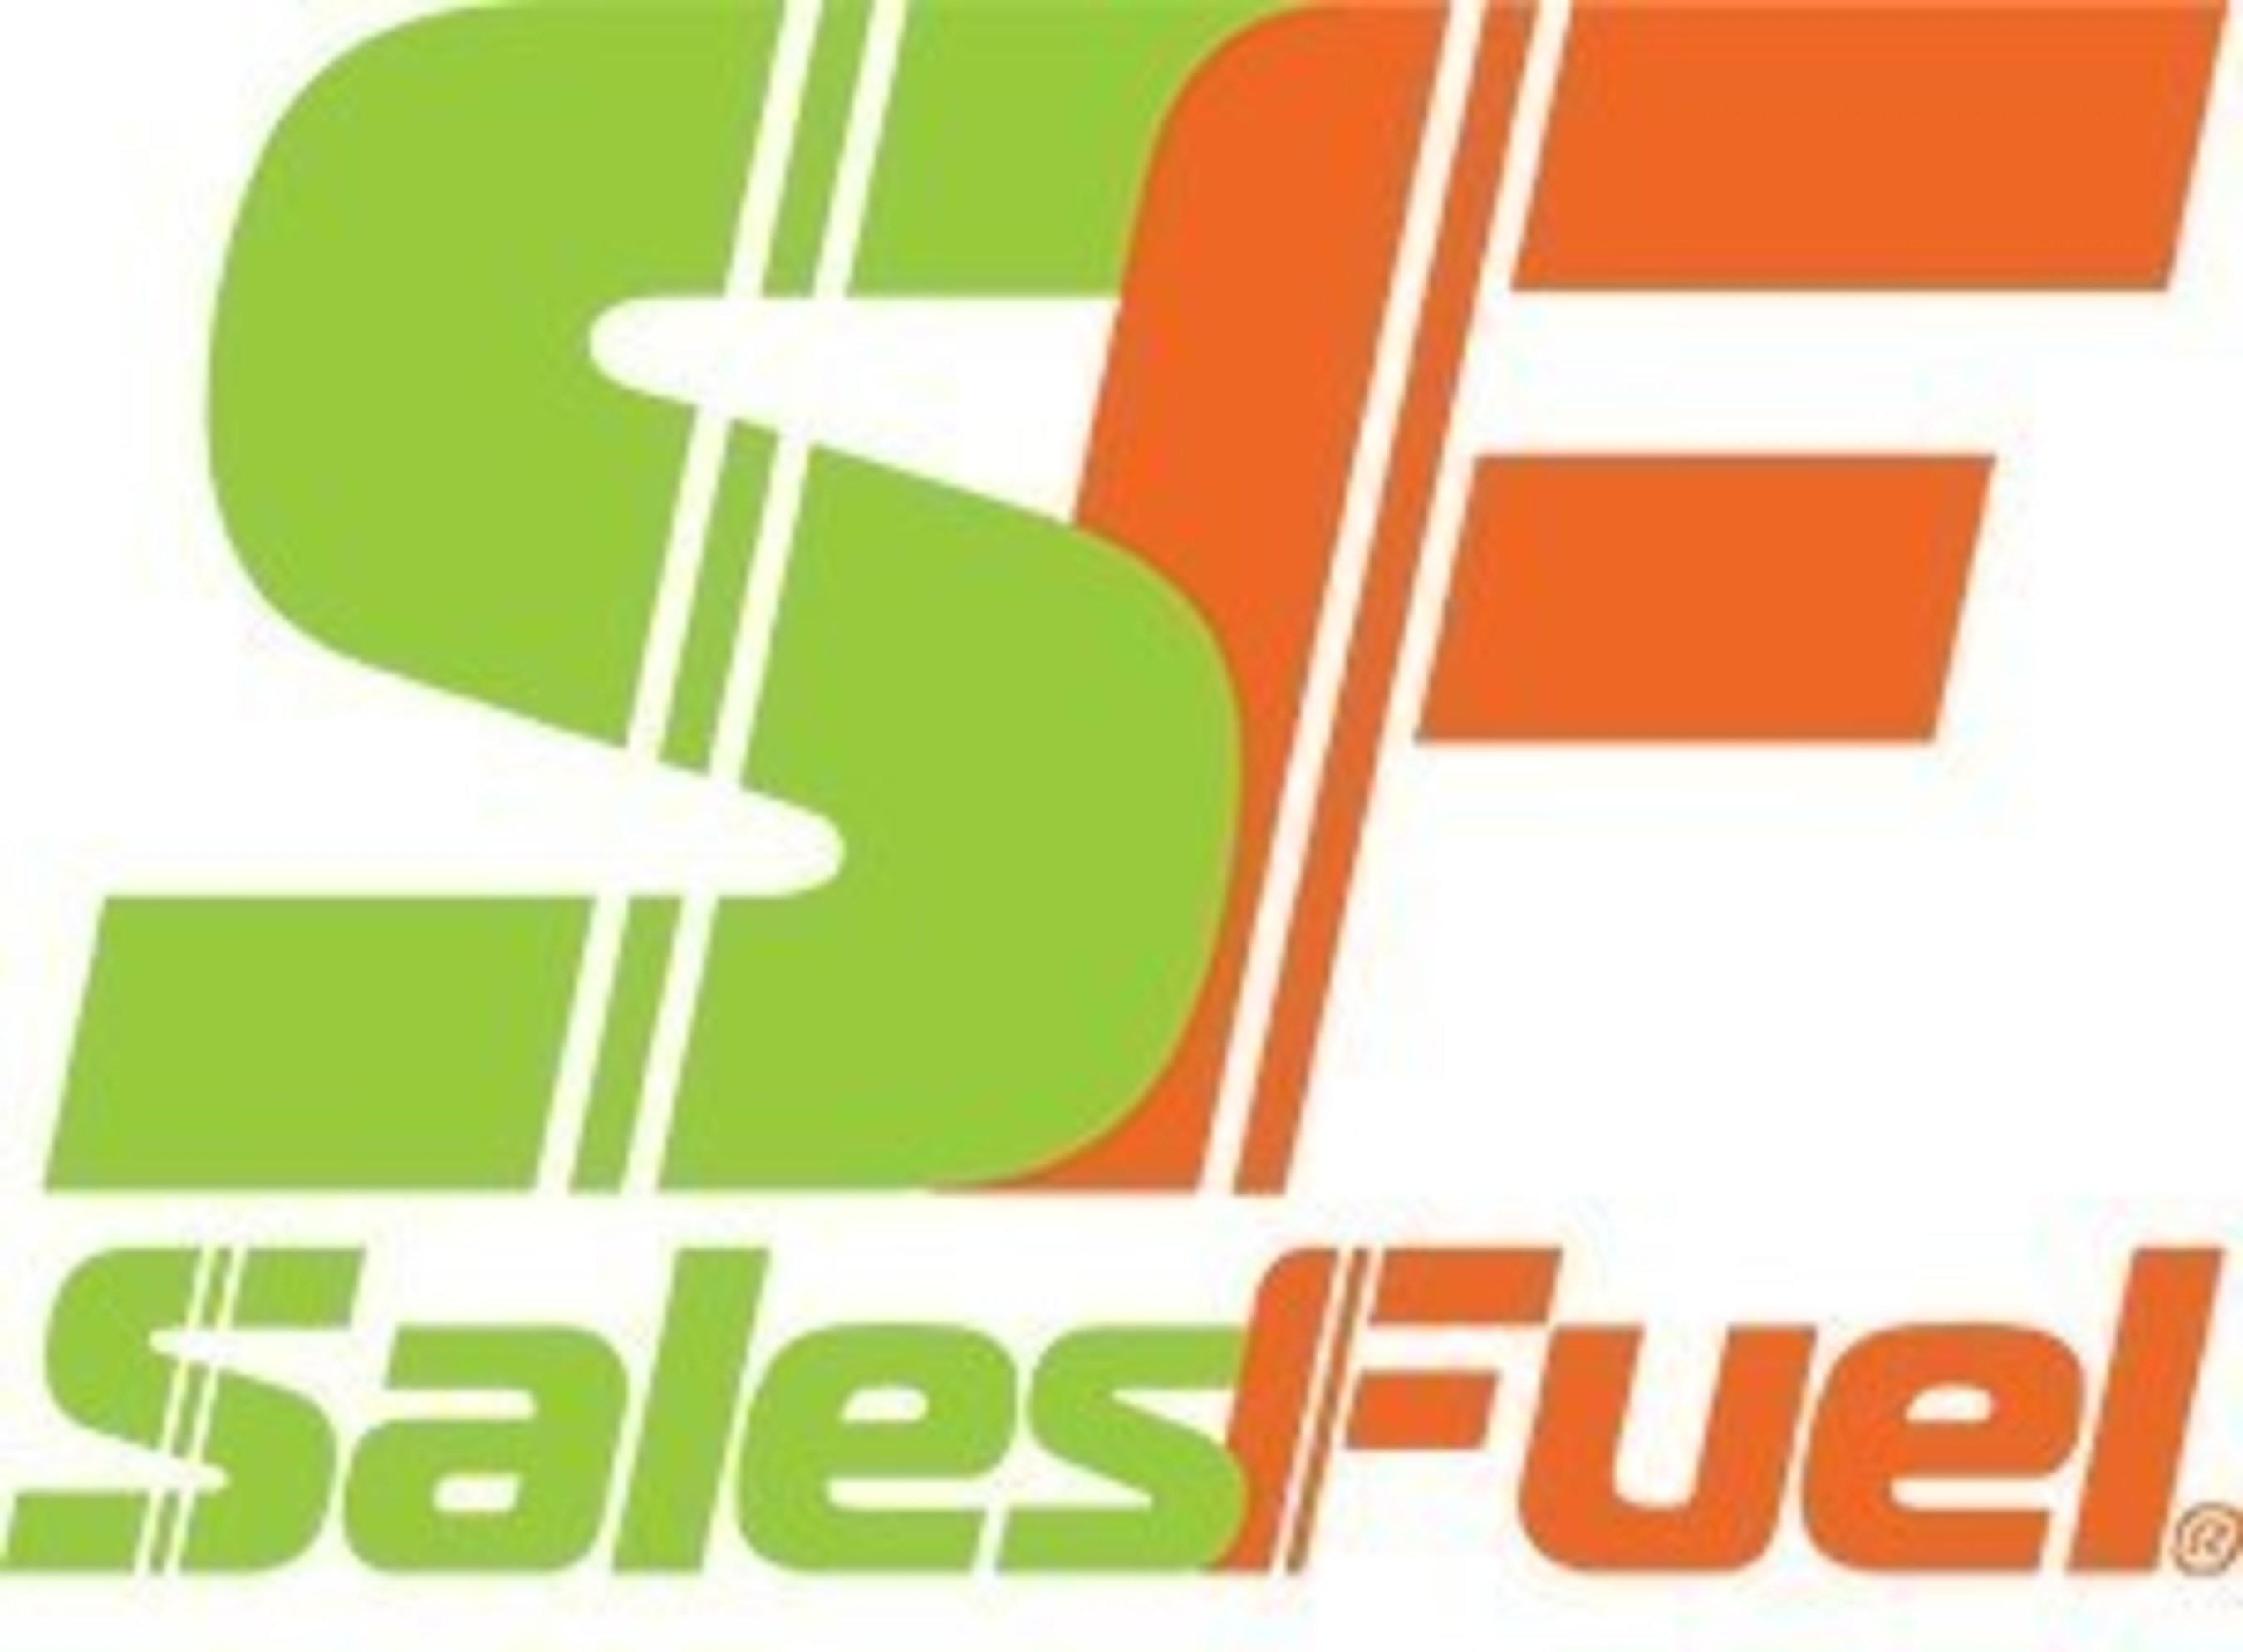 SalesFuel provides intelligence-driven sales enablement and management strategies